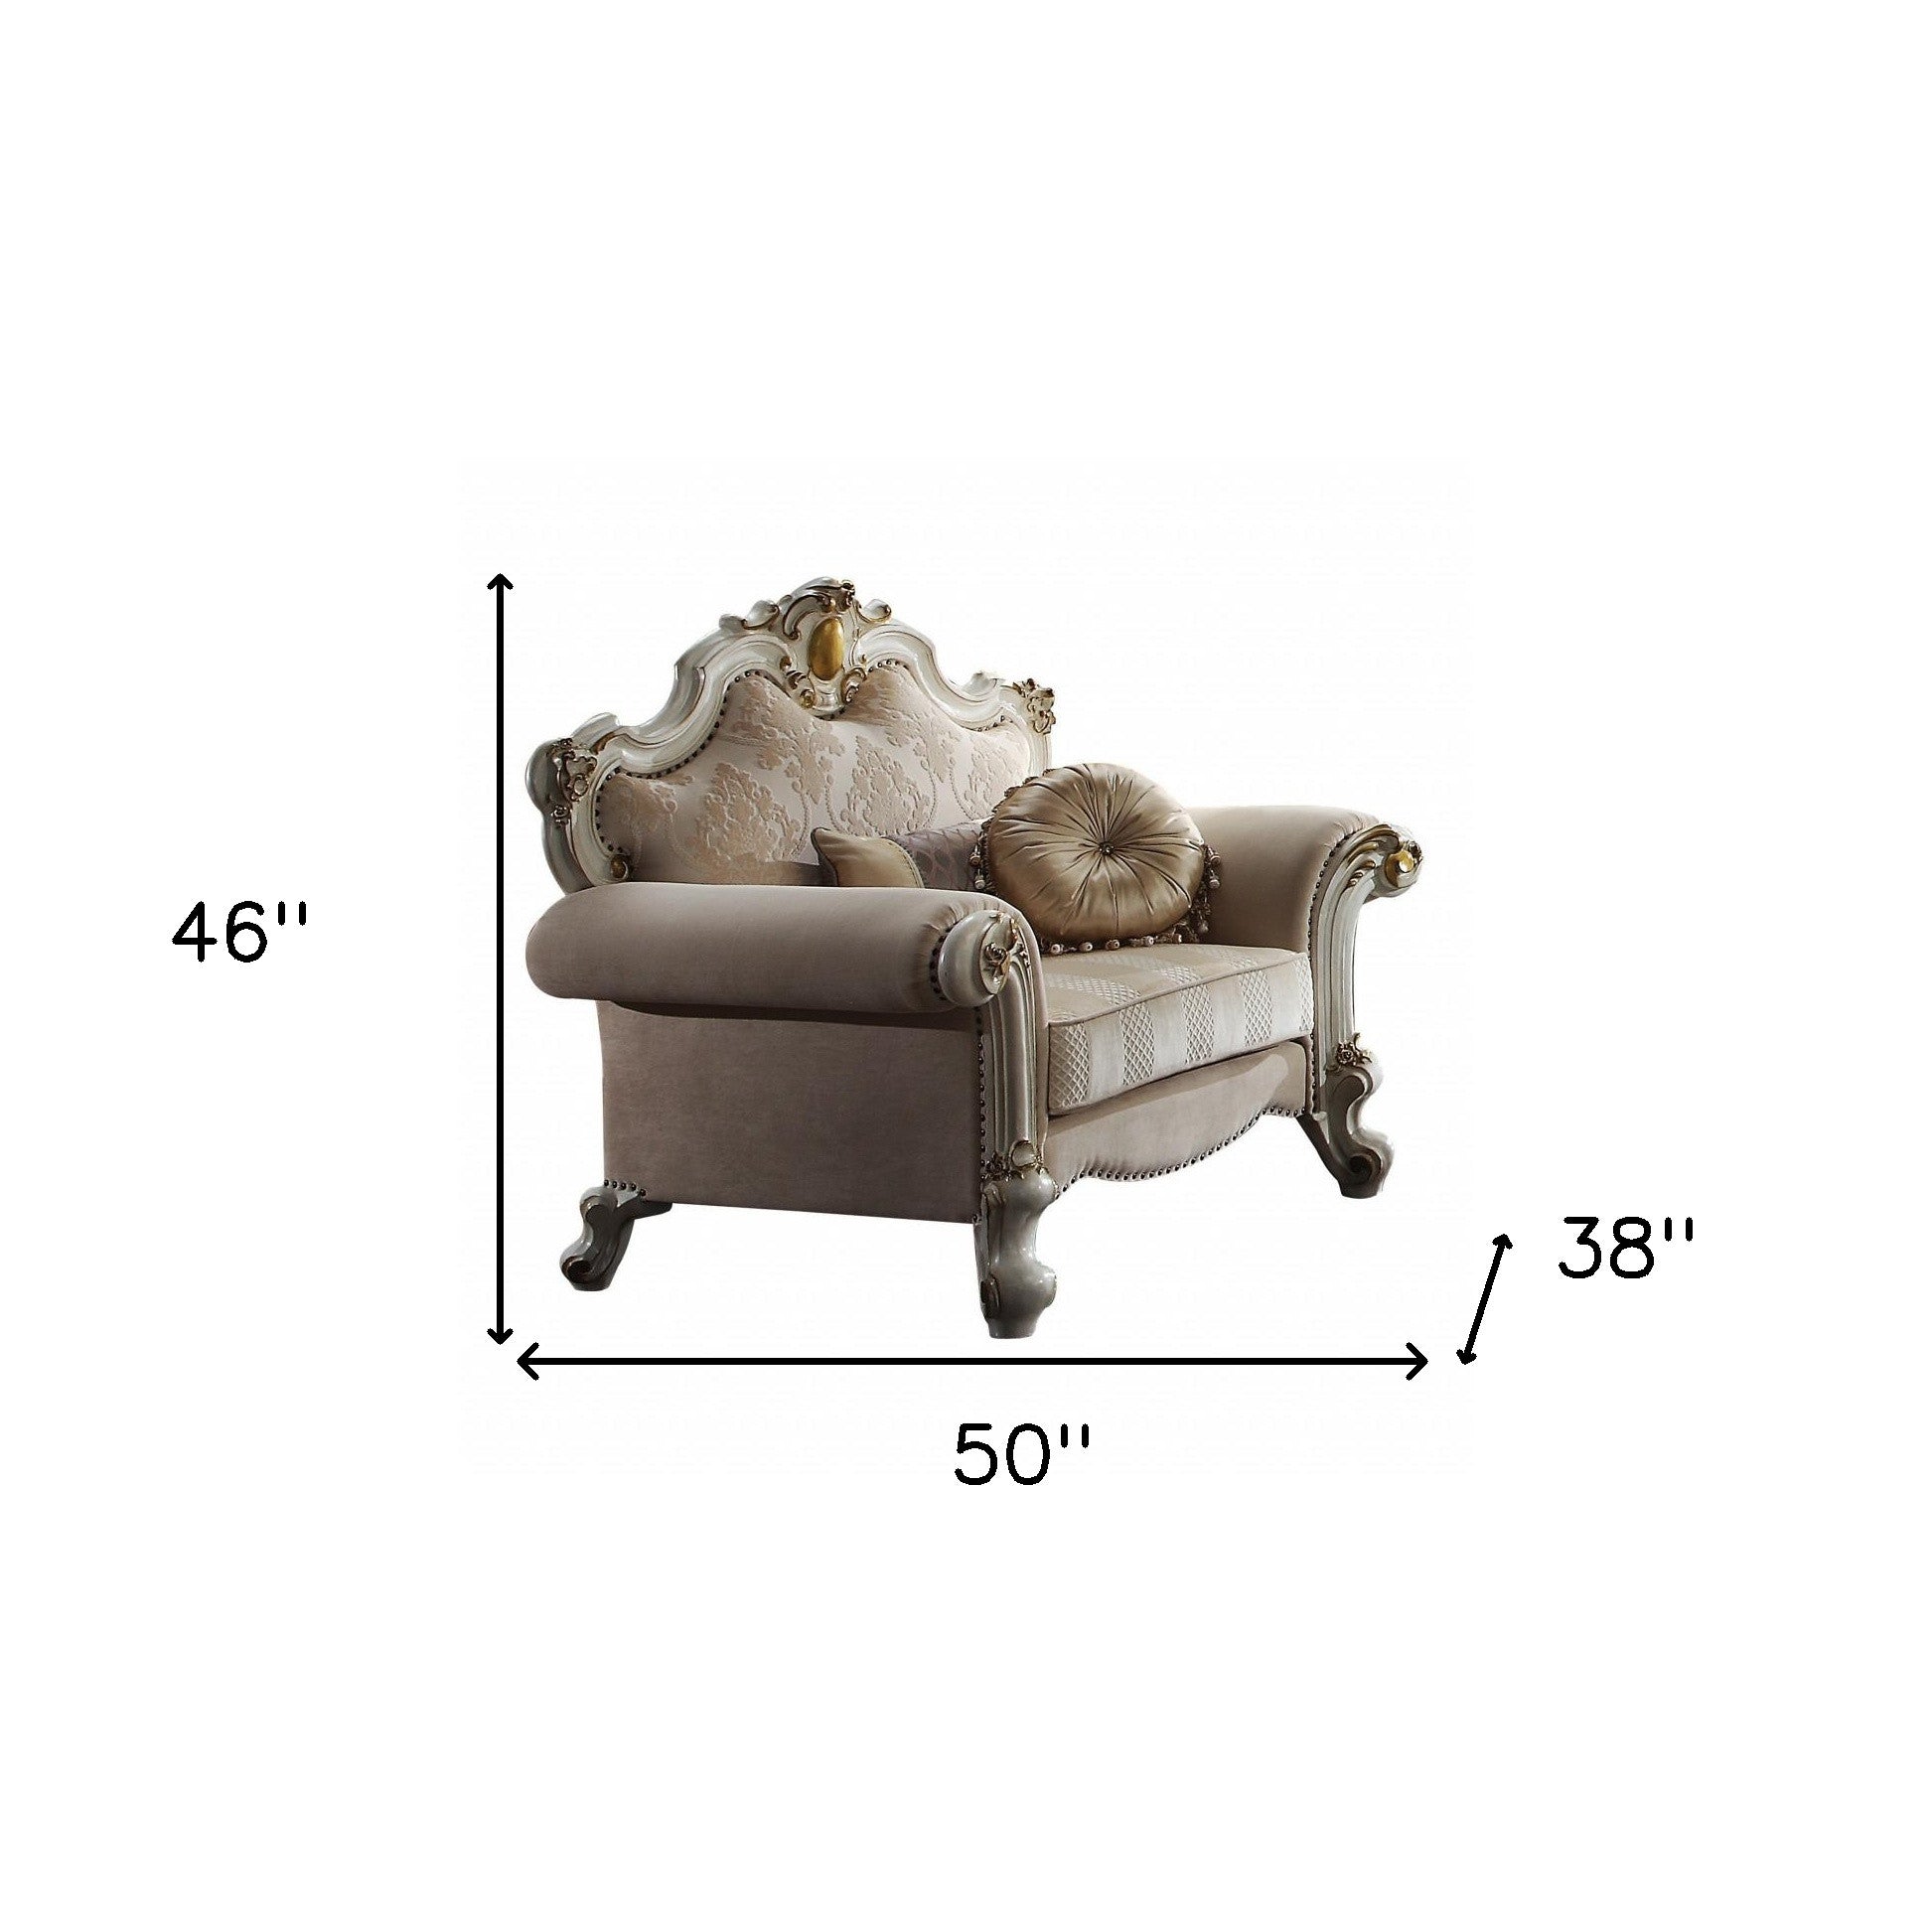 50" Pearl Fabric Damask Arm Chair